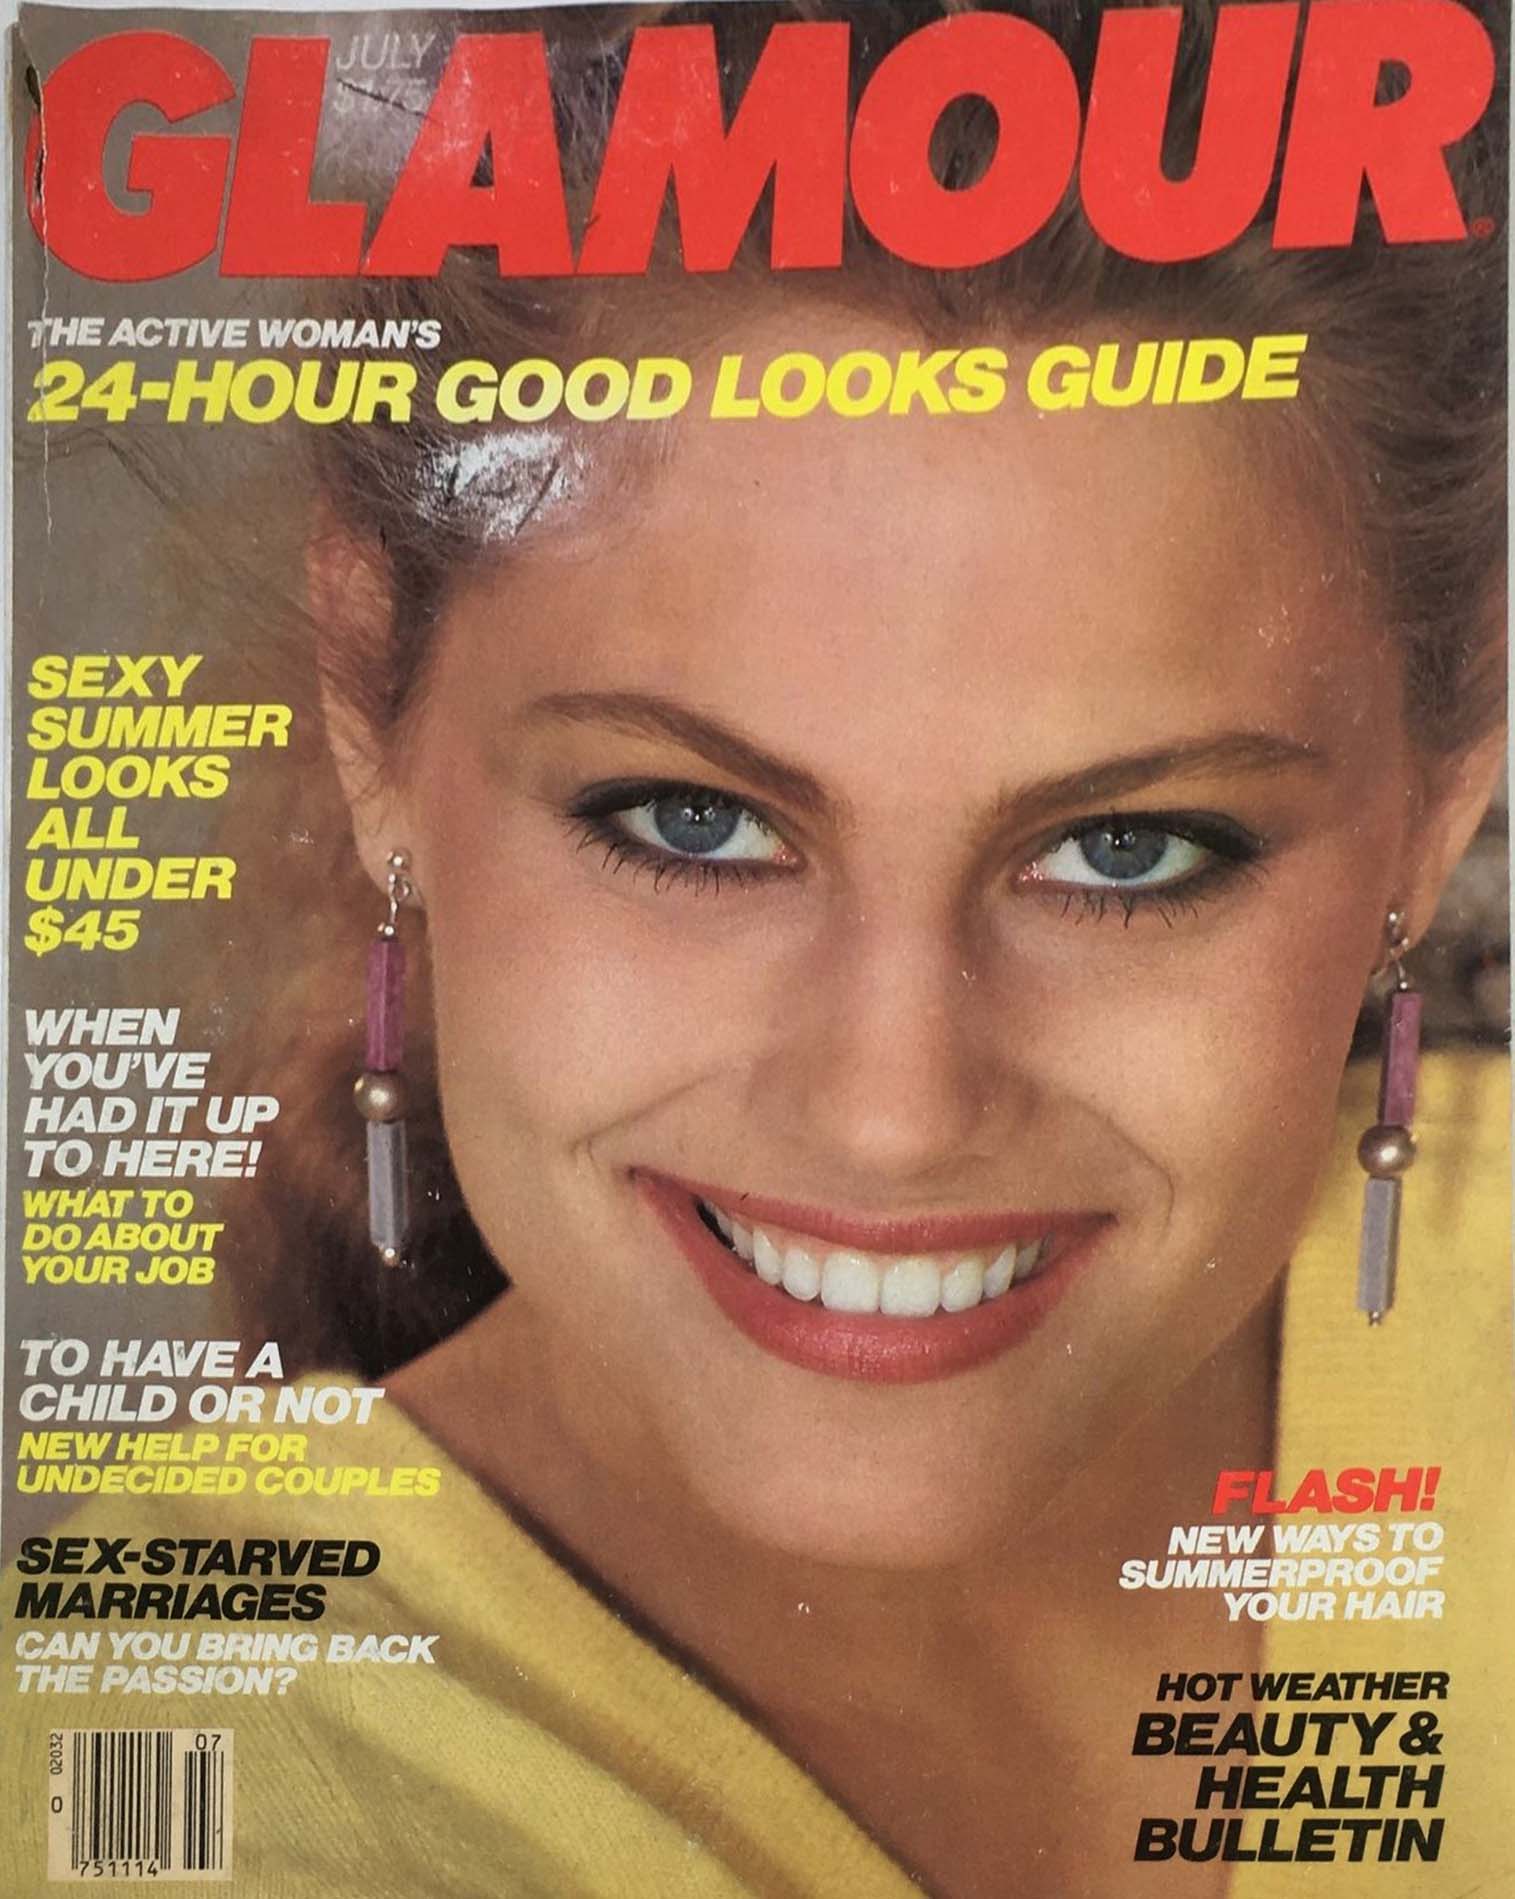 Glamour July 1981 magazine back issue Glamour magizine back copy Glamour July 1981 Womens Magazine Back Issue Published by Conde Nast Publications. Sexy Summer Looks All Under $45.